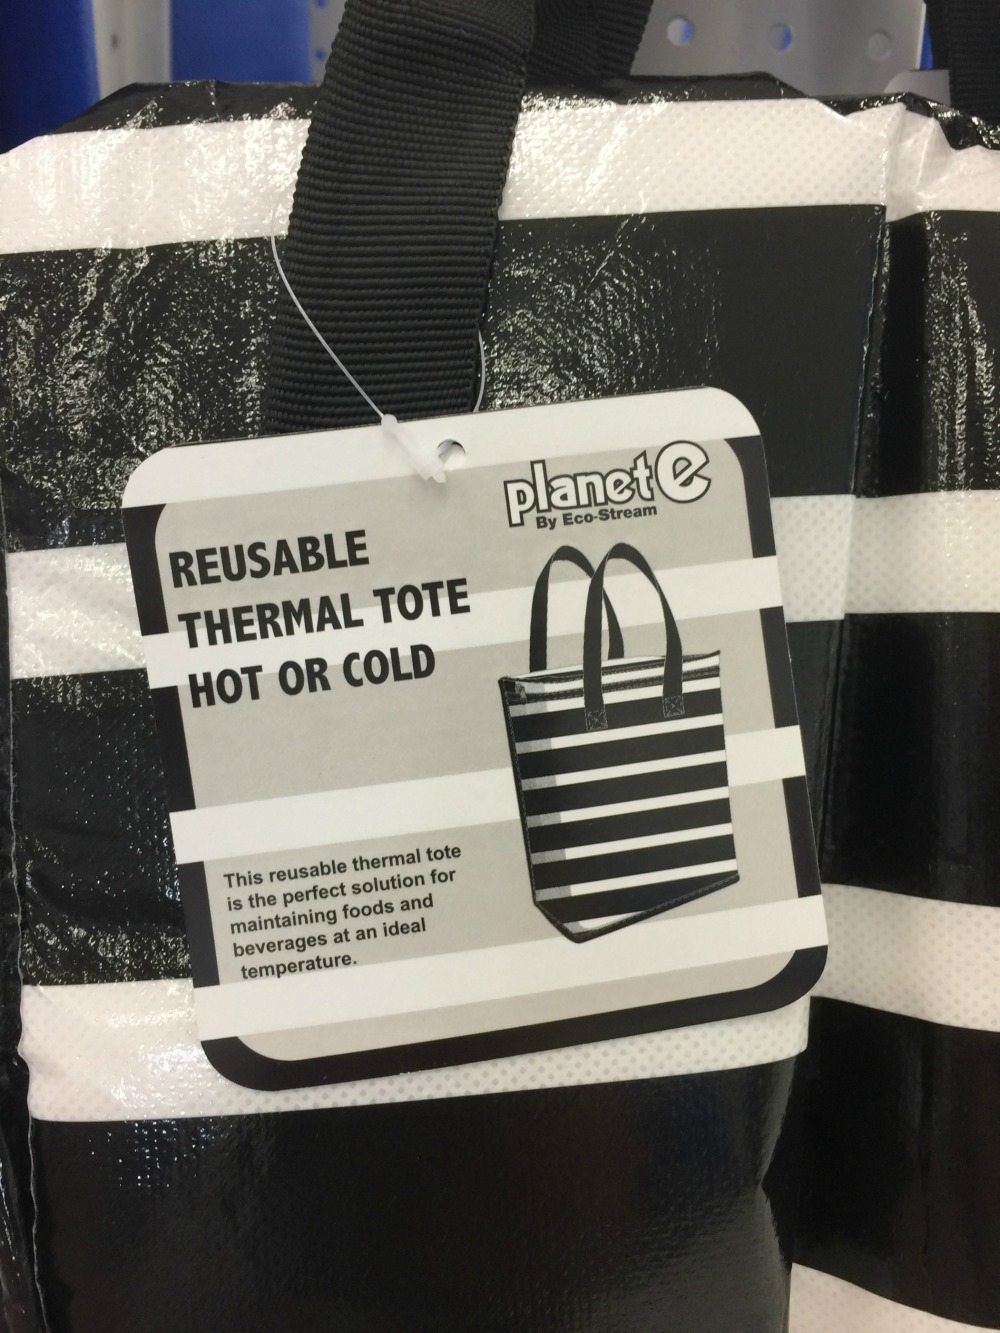 Reusable thermal tote perfect for beach days too